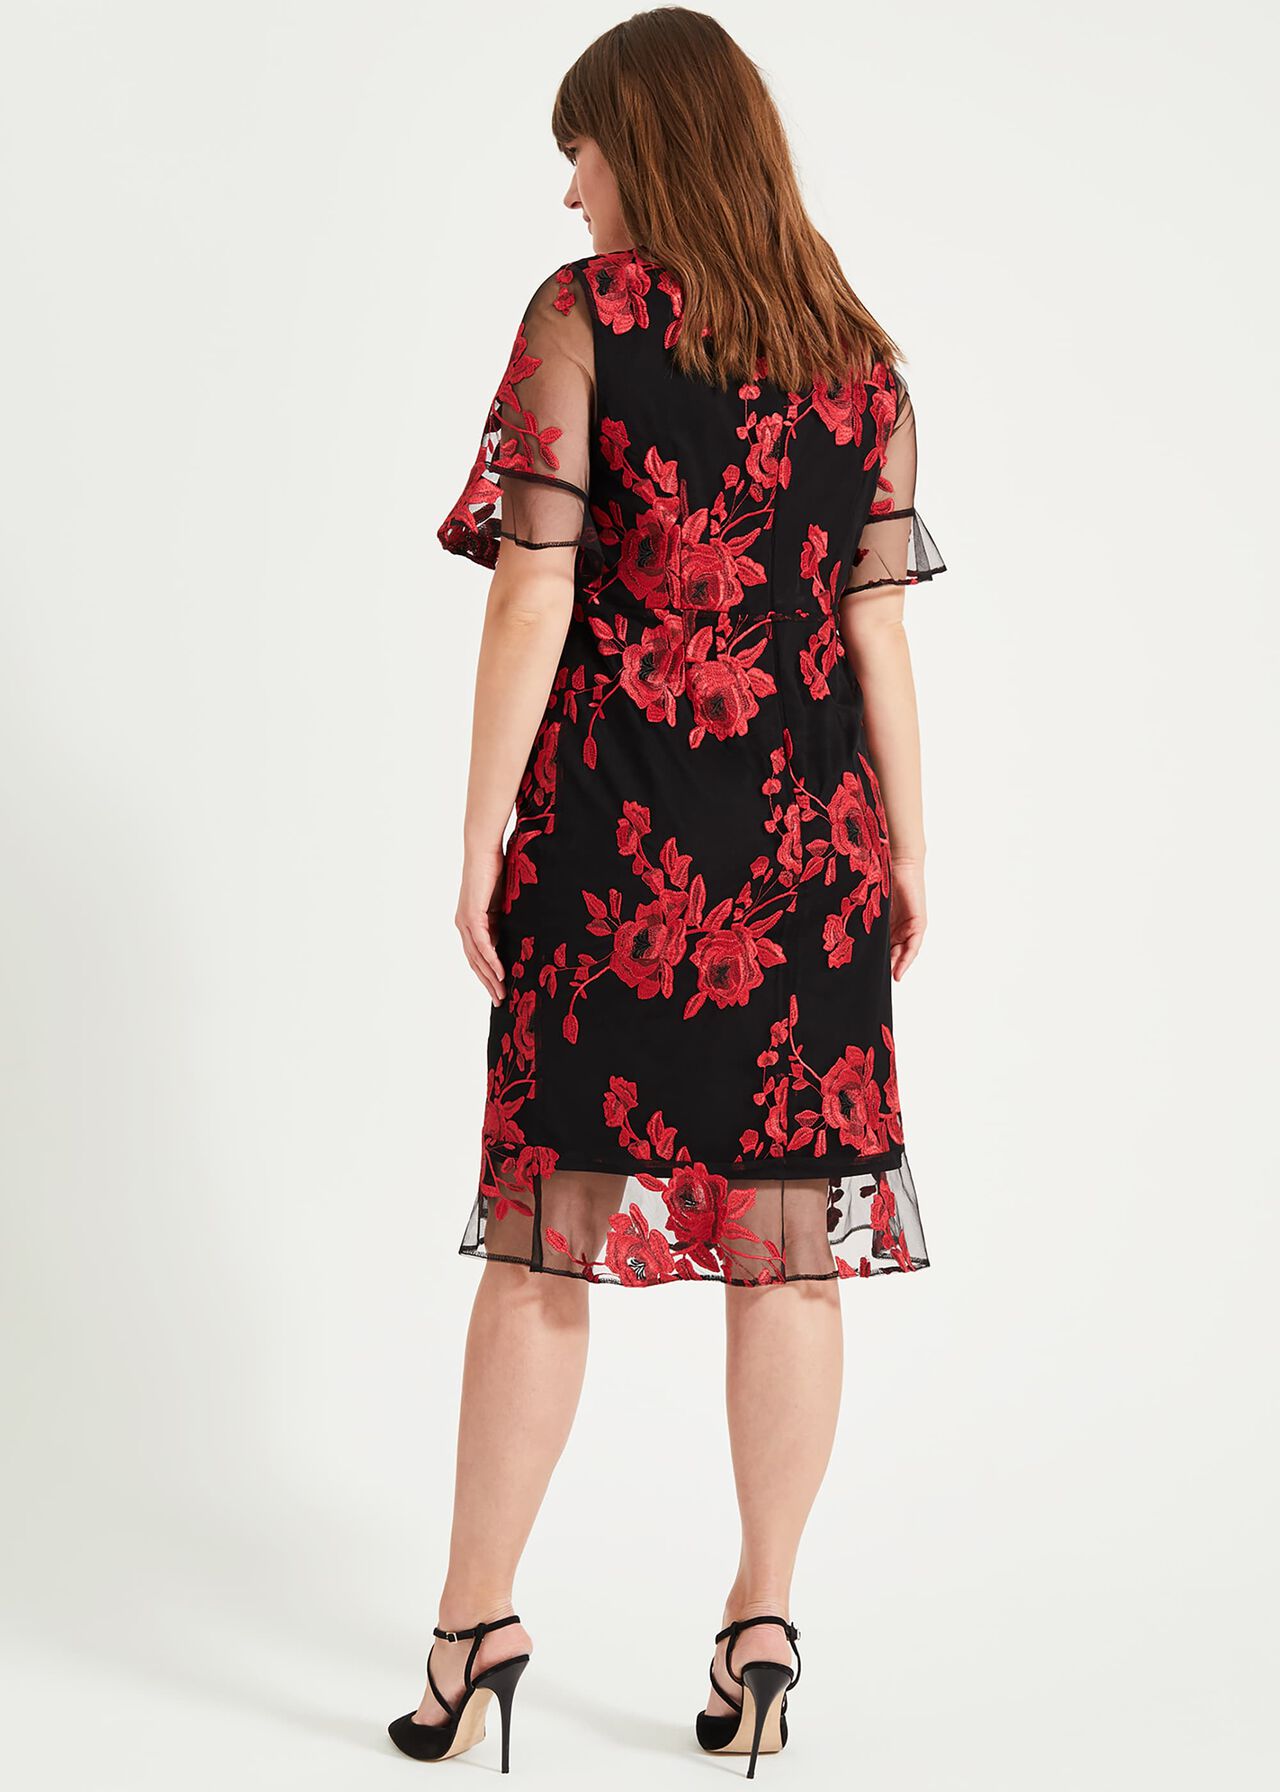 Raven Embroidered Dress